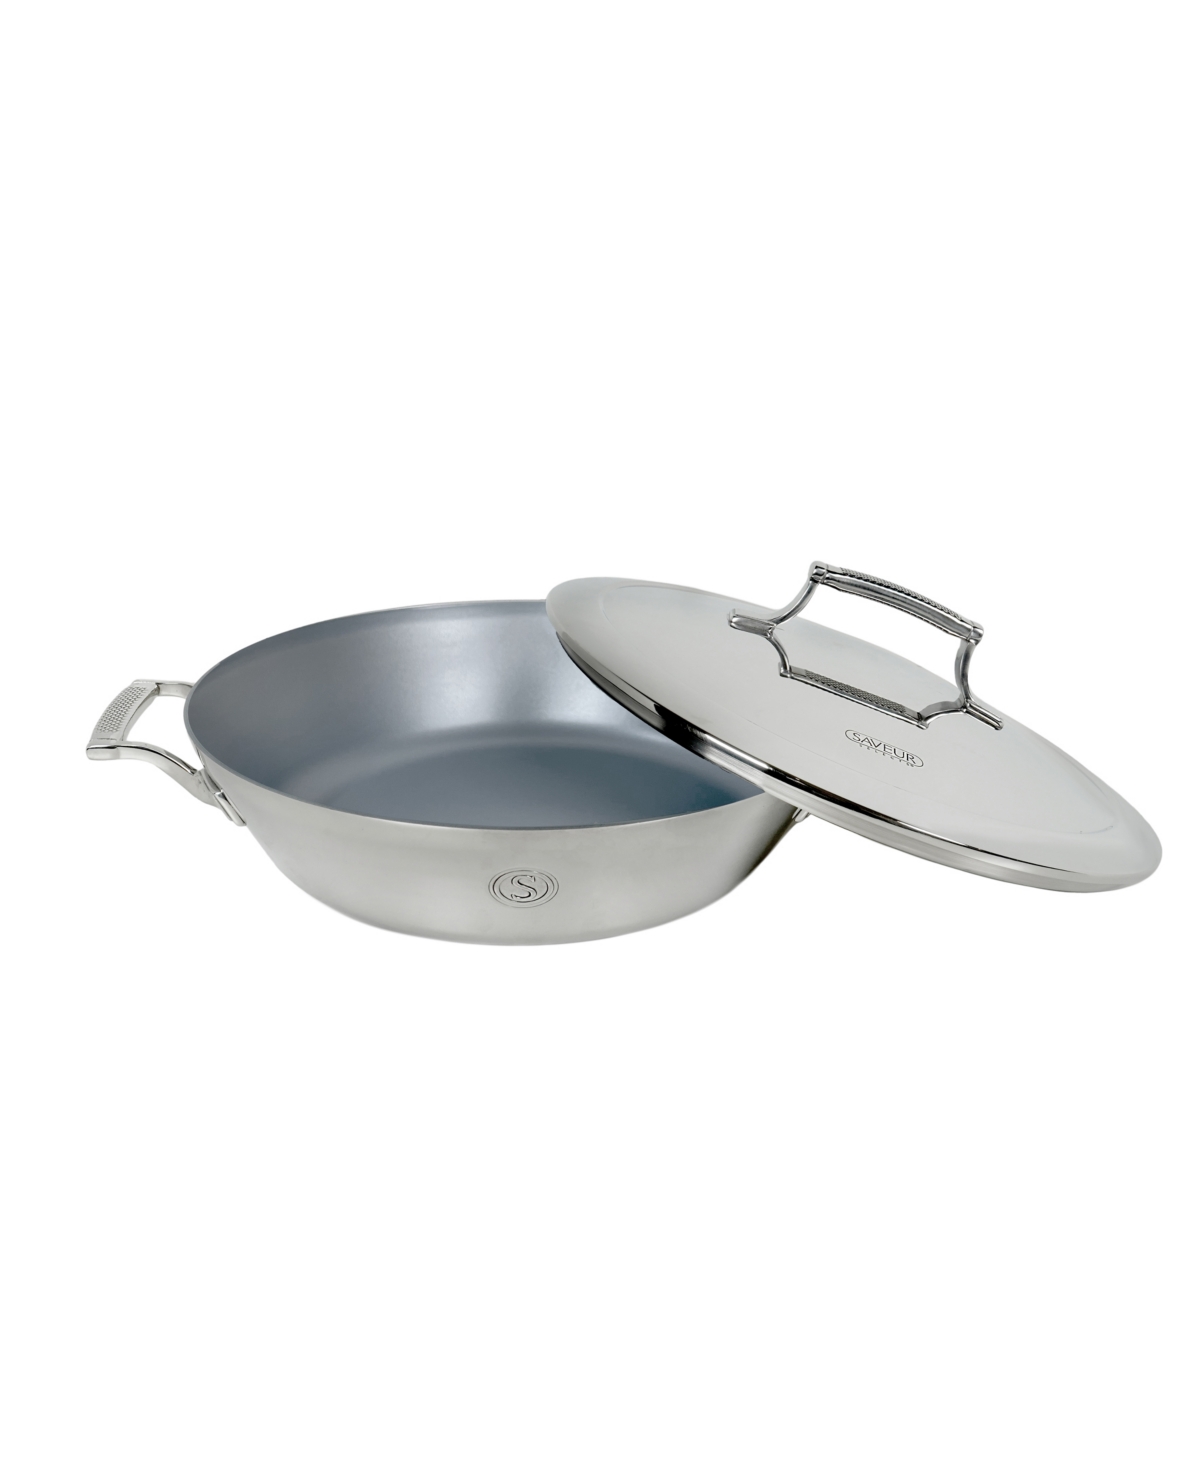 Shop Saveur Selects Tri-ply Stainless Steel 12" Non-stick Everyday Pan With Lid